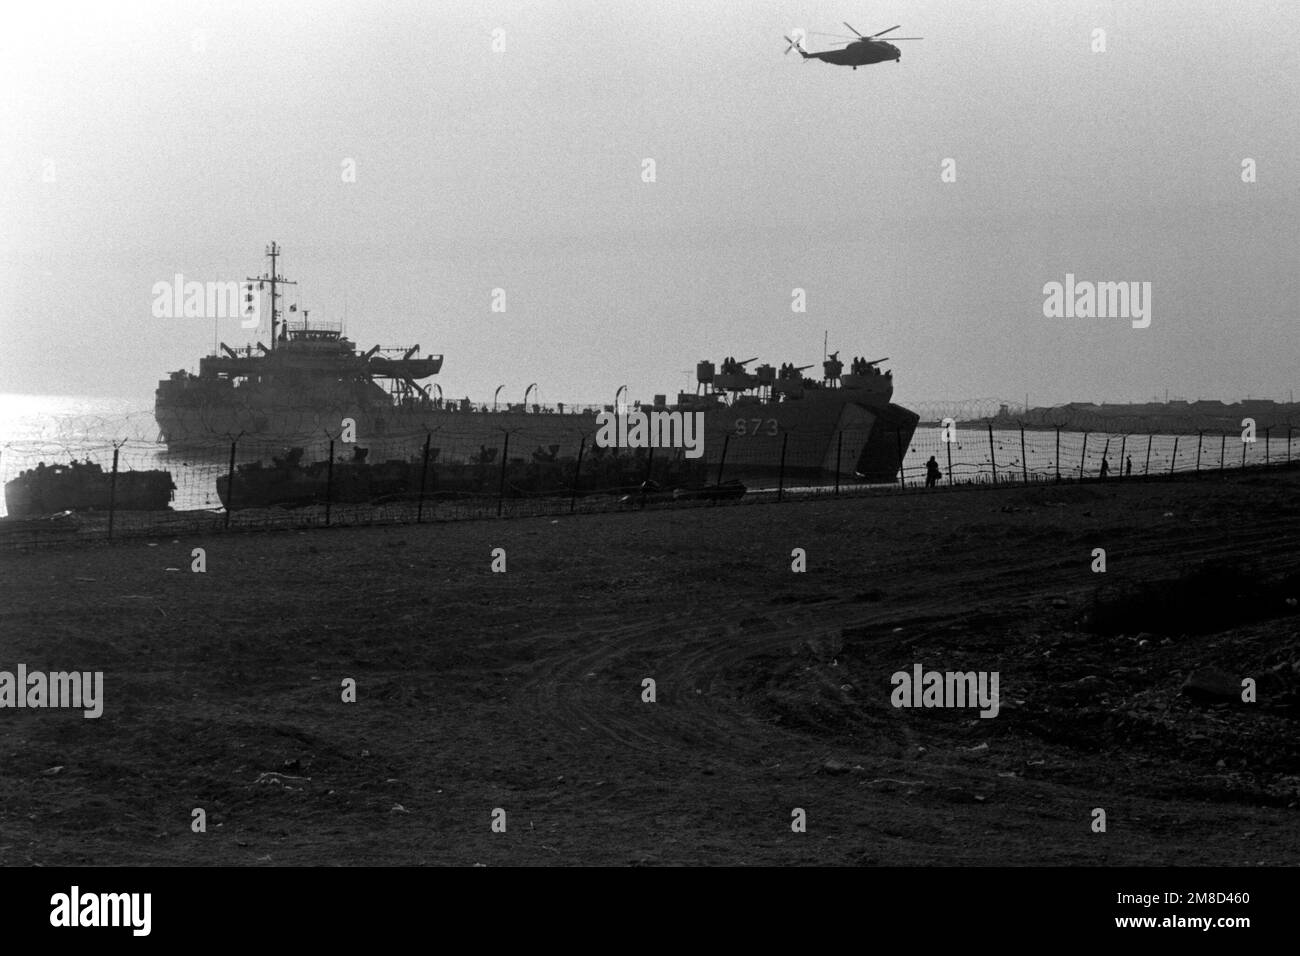 The South Korean tank landing ship Bi Bong (LST-673) sits at the shore line beside a row of amphibious assault vehicles during the combined South Korean/U.S. exercise Team Spirit '90. Subject Operation/Series: TEAM SPIRIT '90 Base: Pohang Country: Republic Of Korea (KOR) Stock Photo